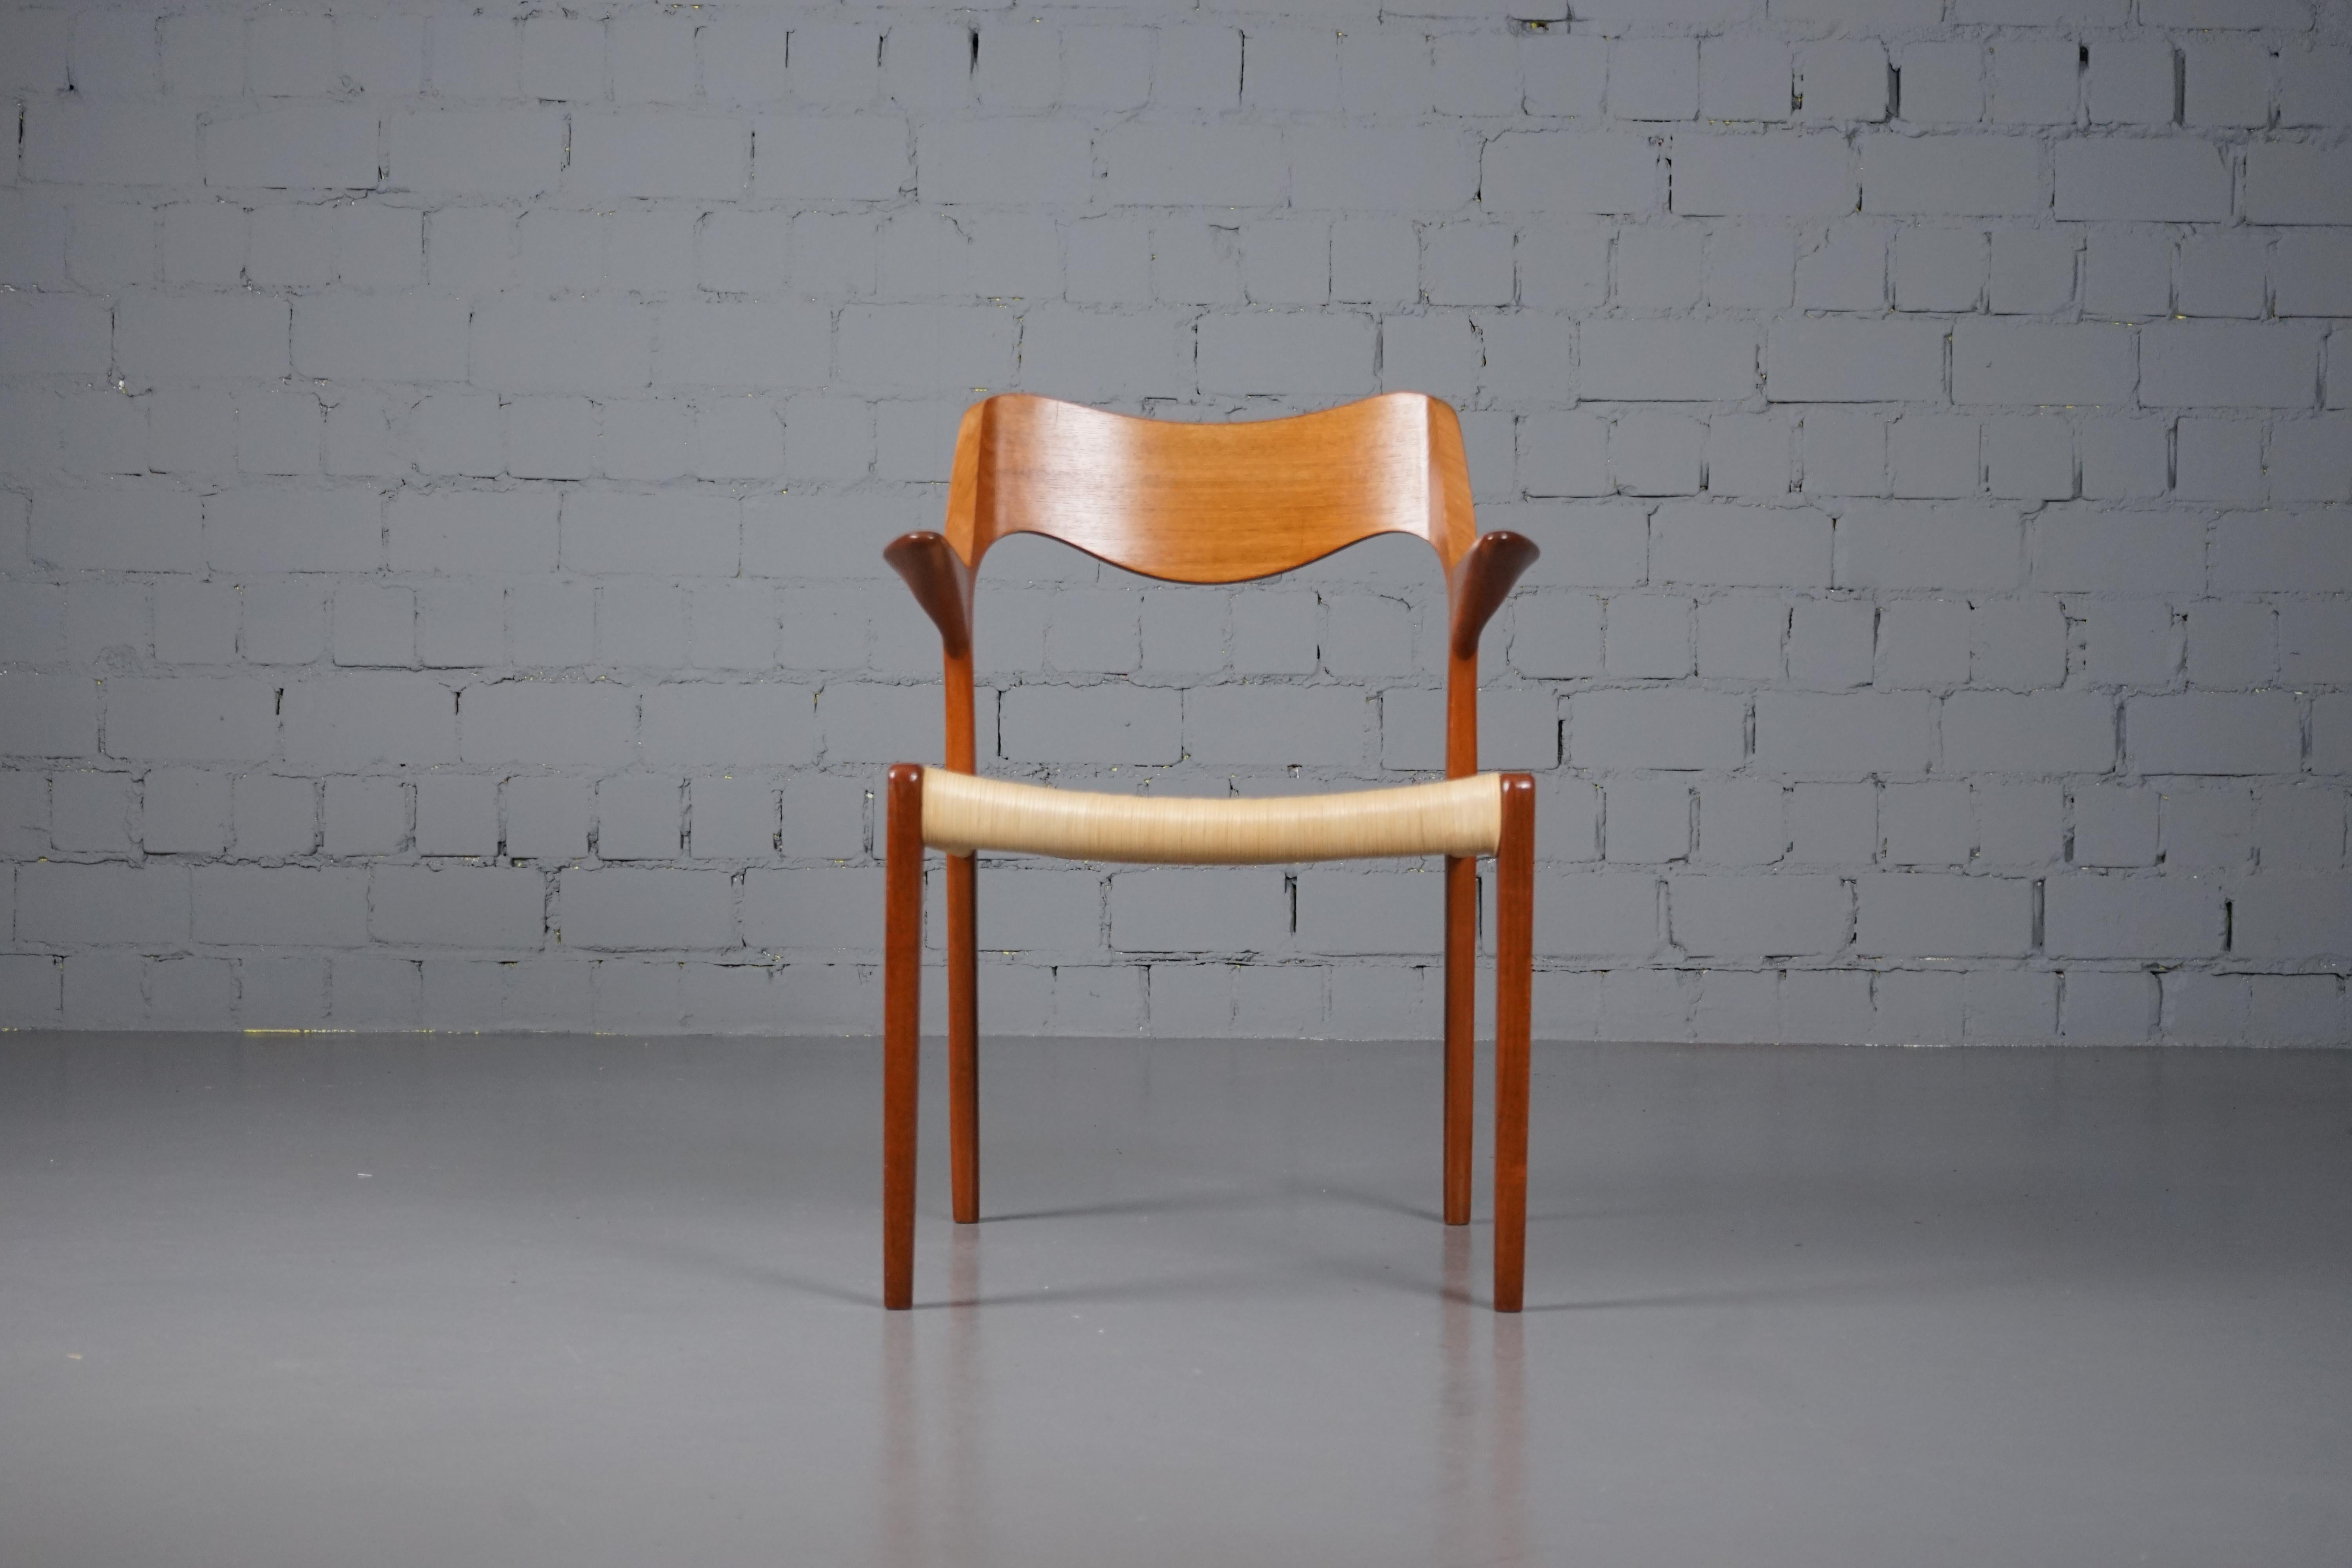 Teak chair model No. 55 chair by Niels O. Moller for J.L Møller
In good original condition with signs of age and use.